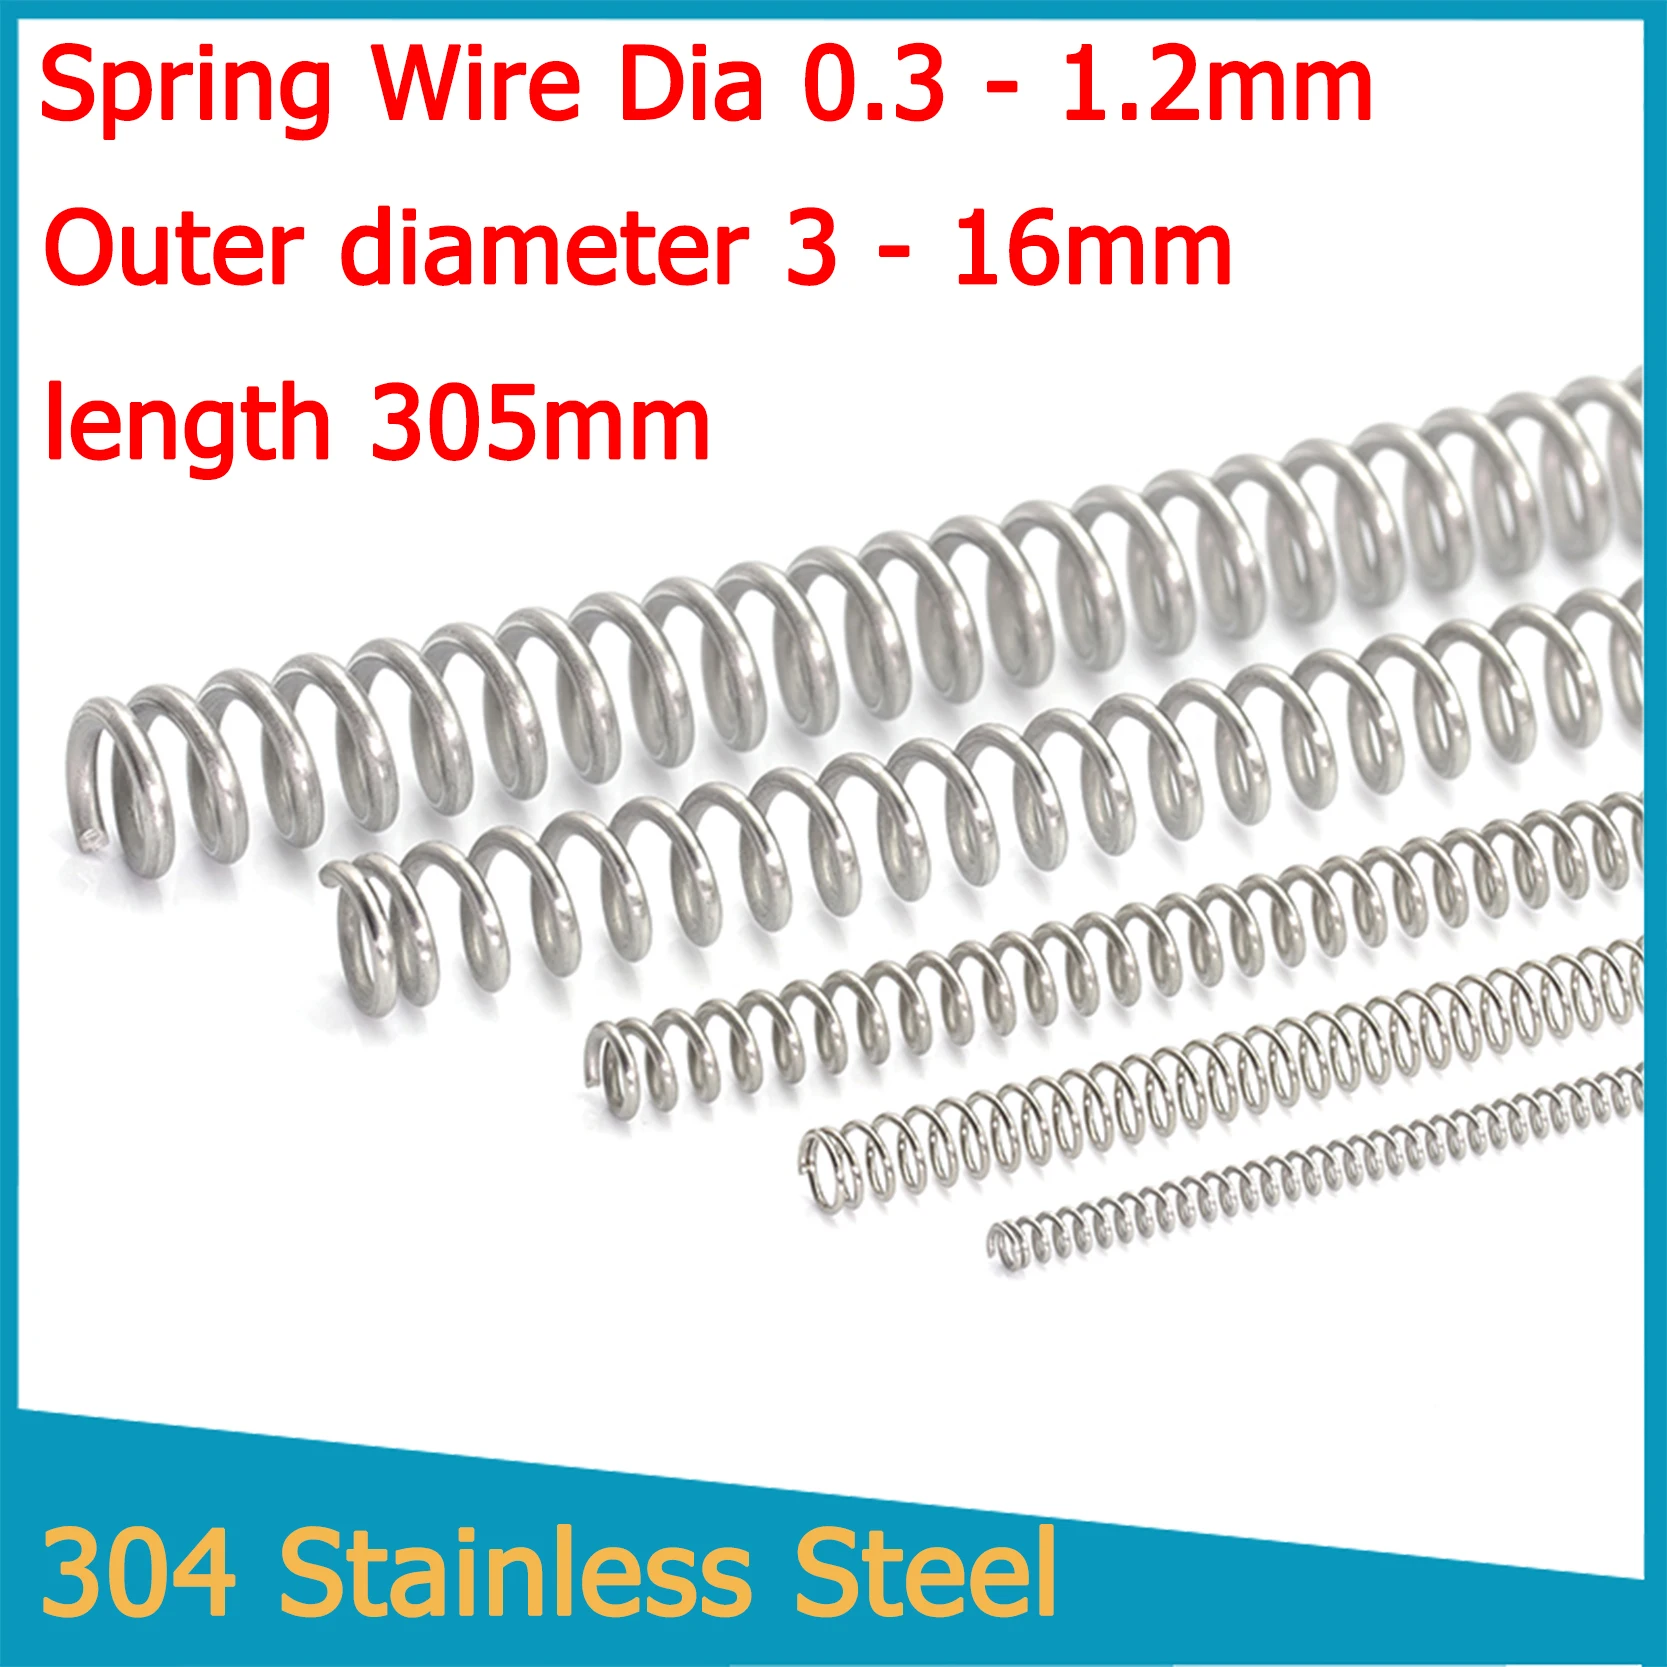 0.3mm Wire Diameter Compression Spring 304 Stainless Steel Pressure Small Spring 